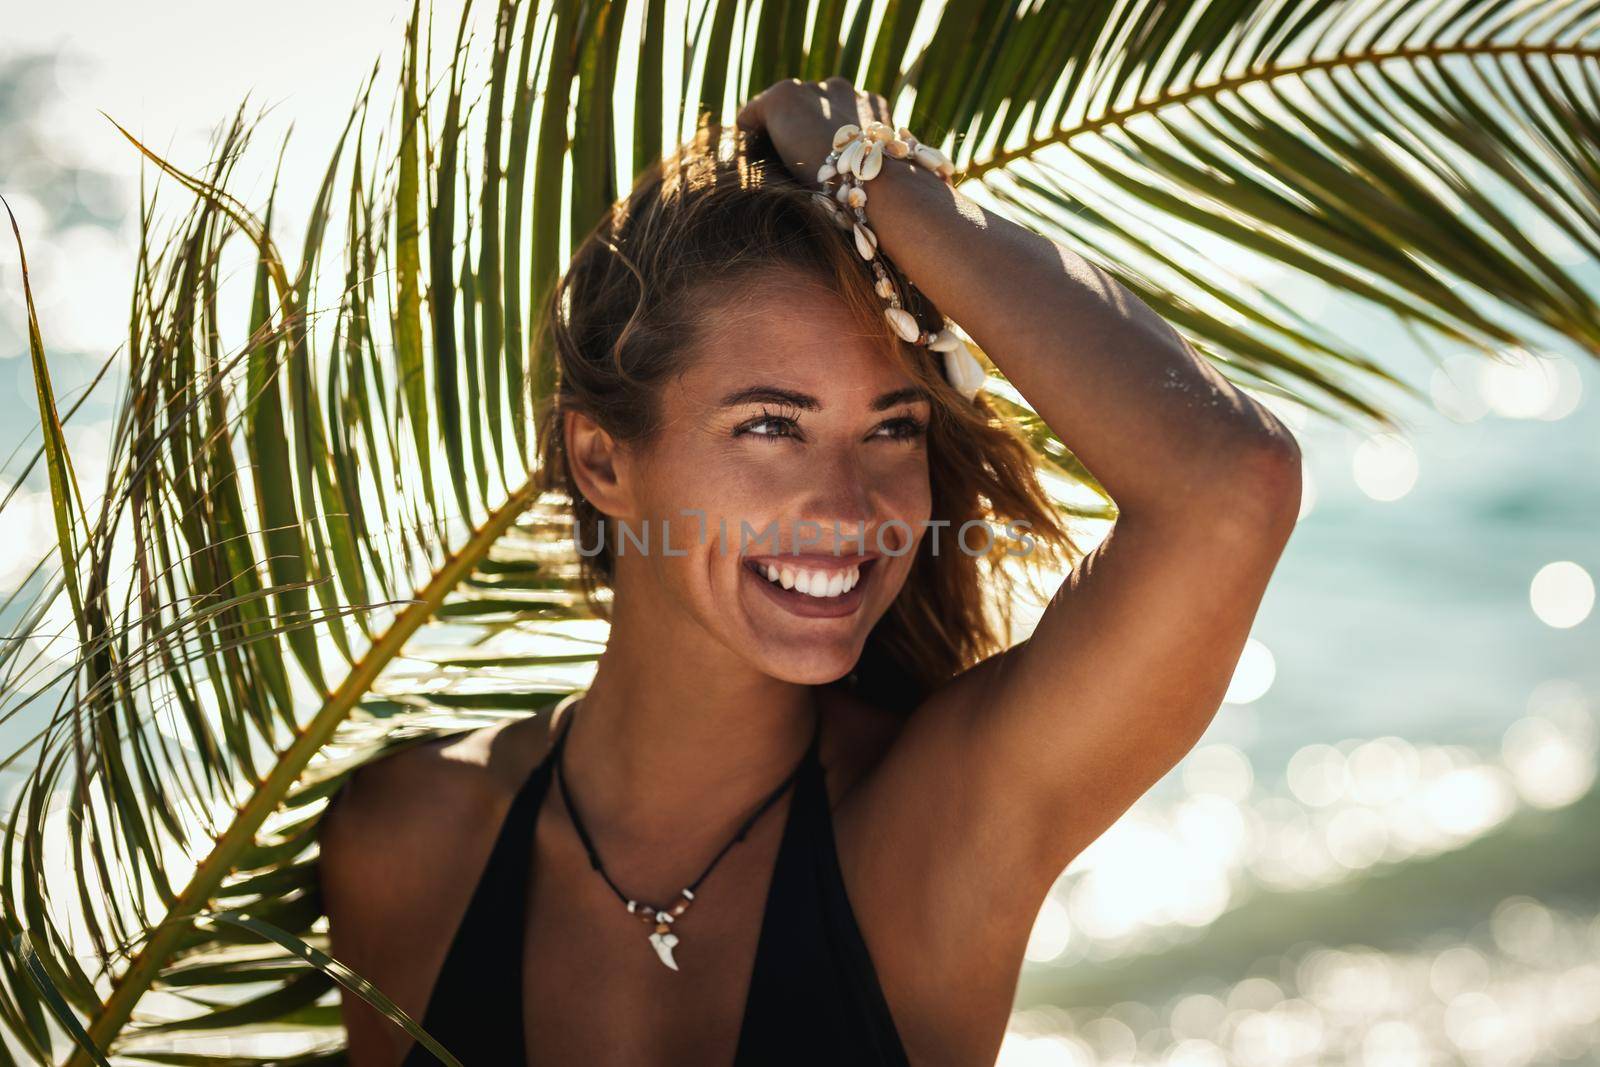 Portrait of an attractive young woman is posing and enjoying at the tropical beach under palm tree leaf.